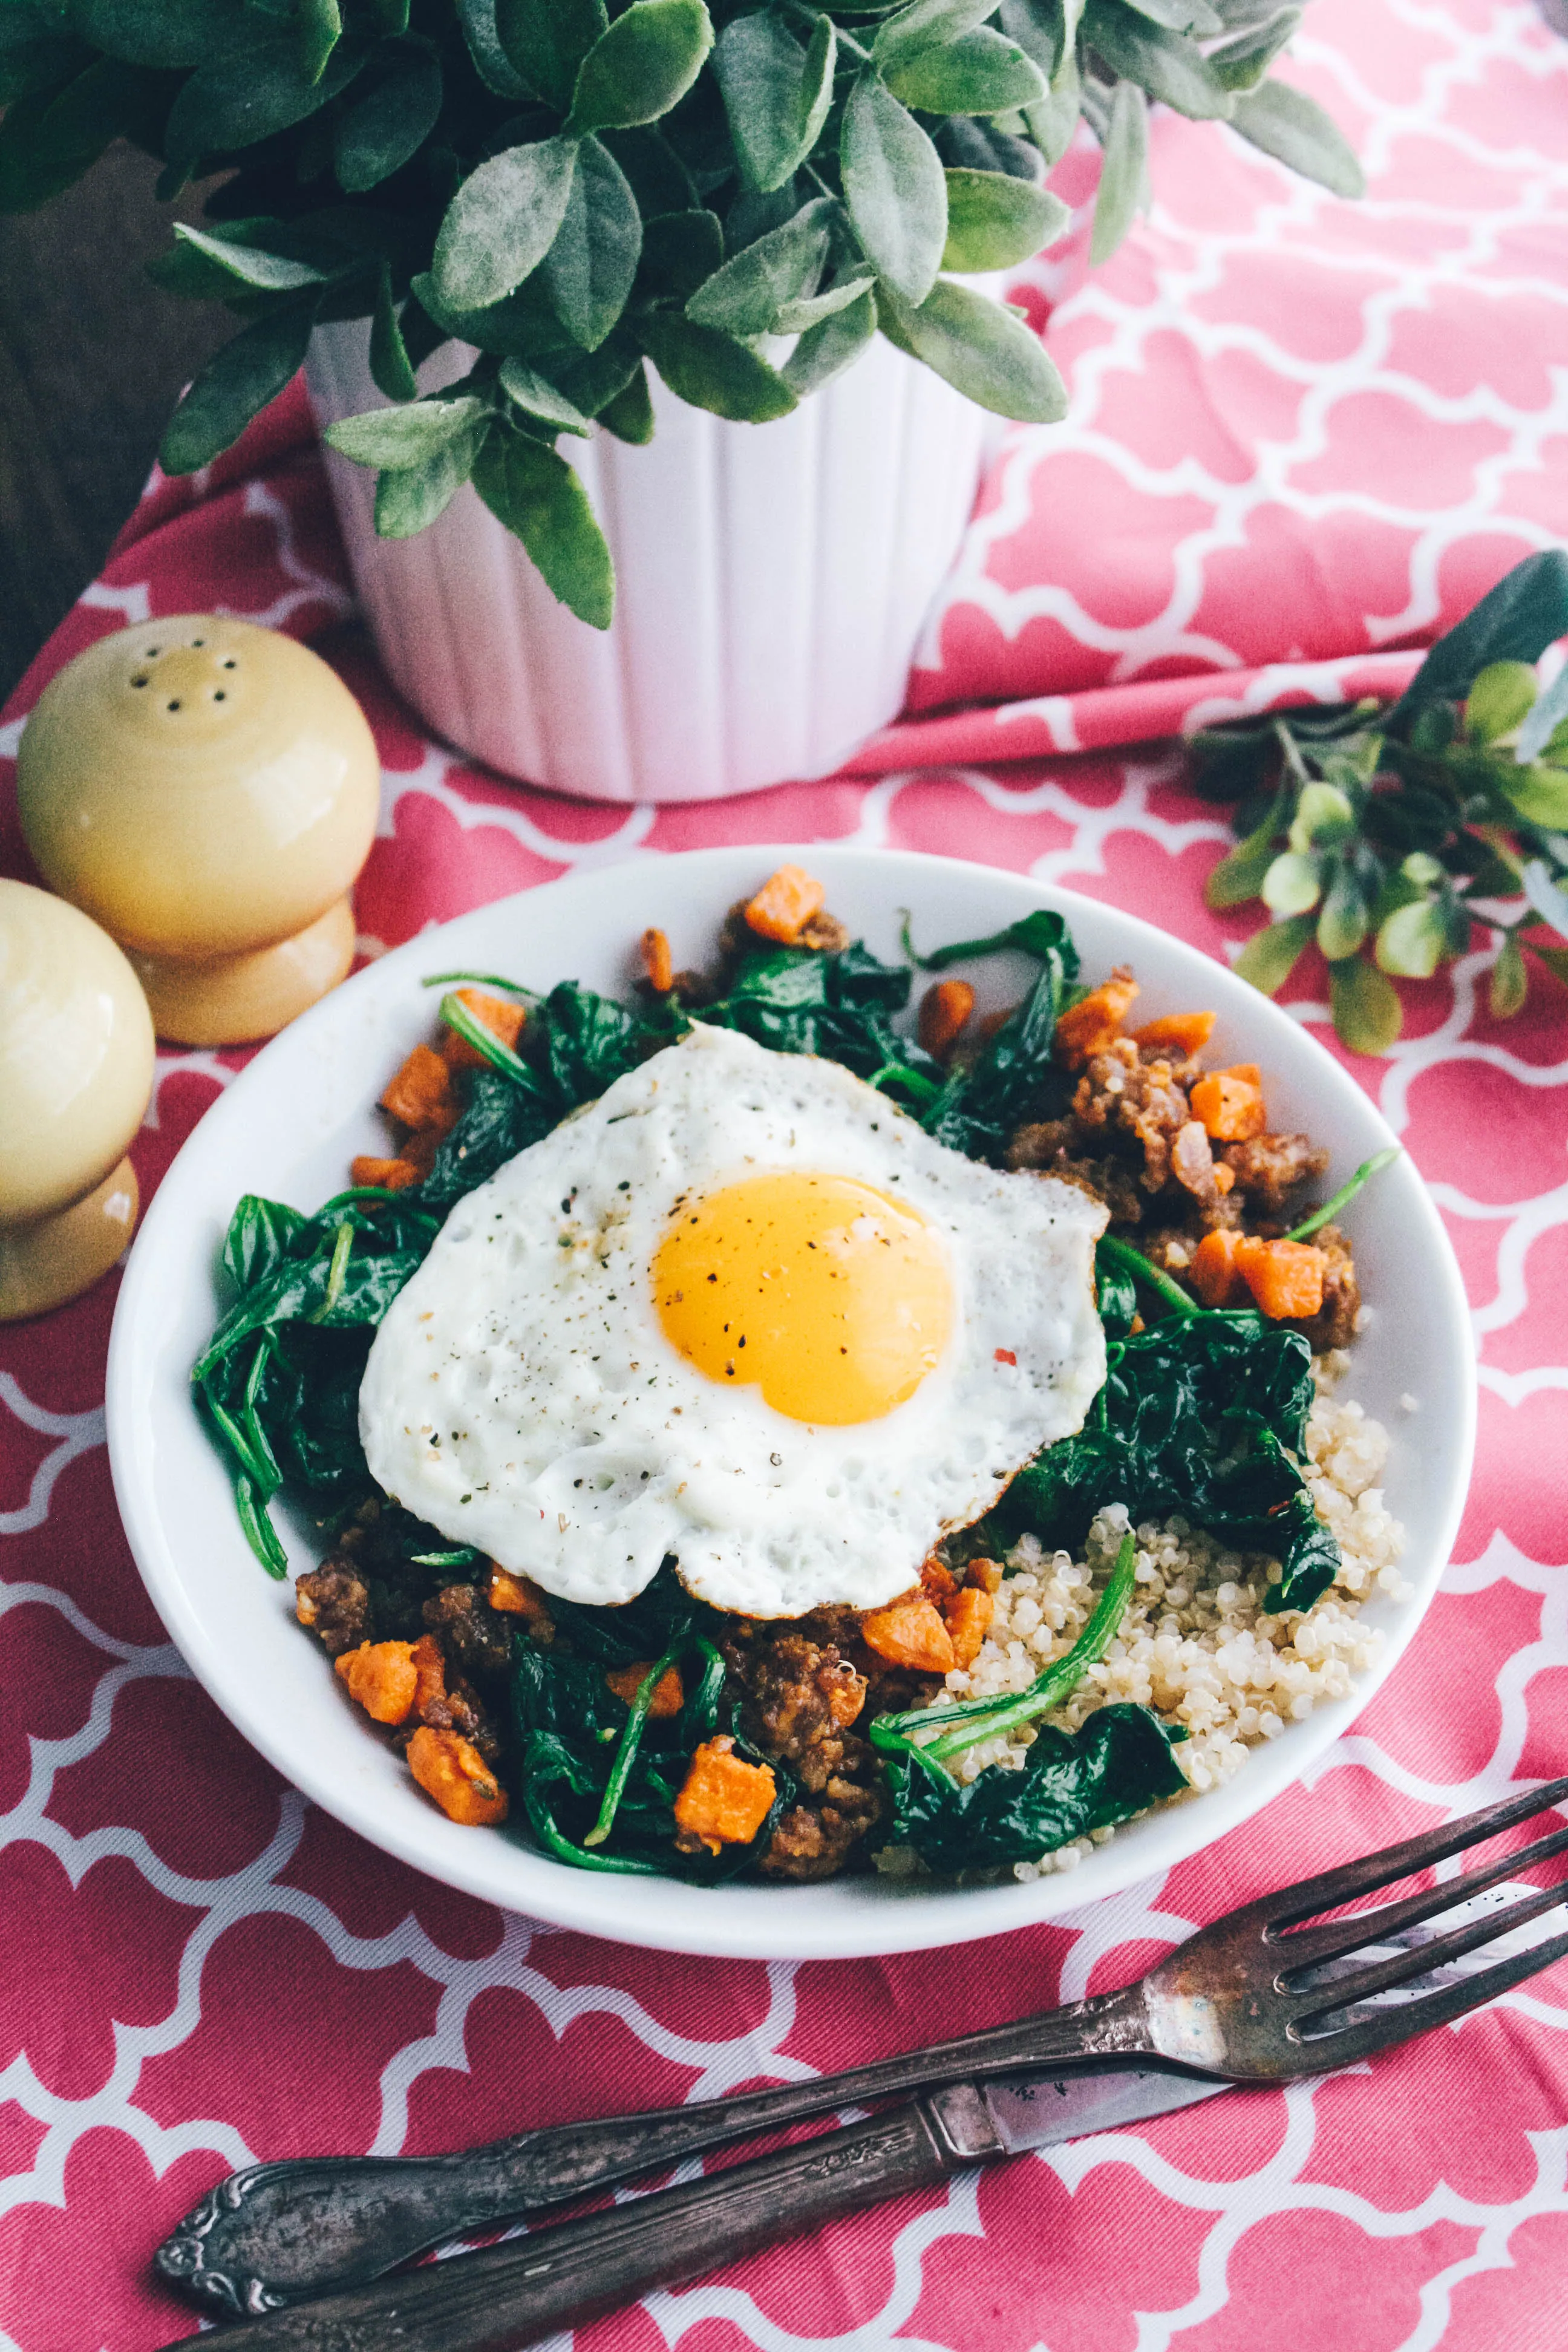 Sausage, Sweet Potato & Spinach Quinoa Bowls with Egg are a delightful dish for breakfast! Sausage, Sweet Potato & Spinach Quinoa Bowls with Egg are so tasty and easy to make, too.